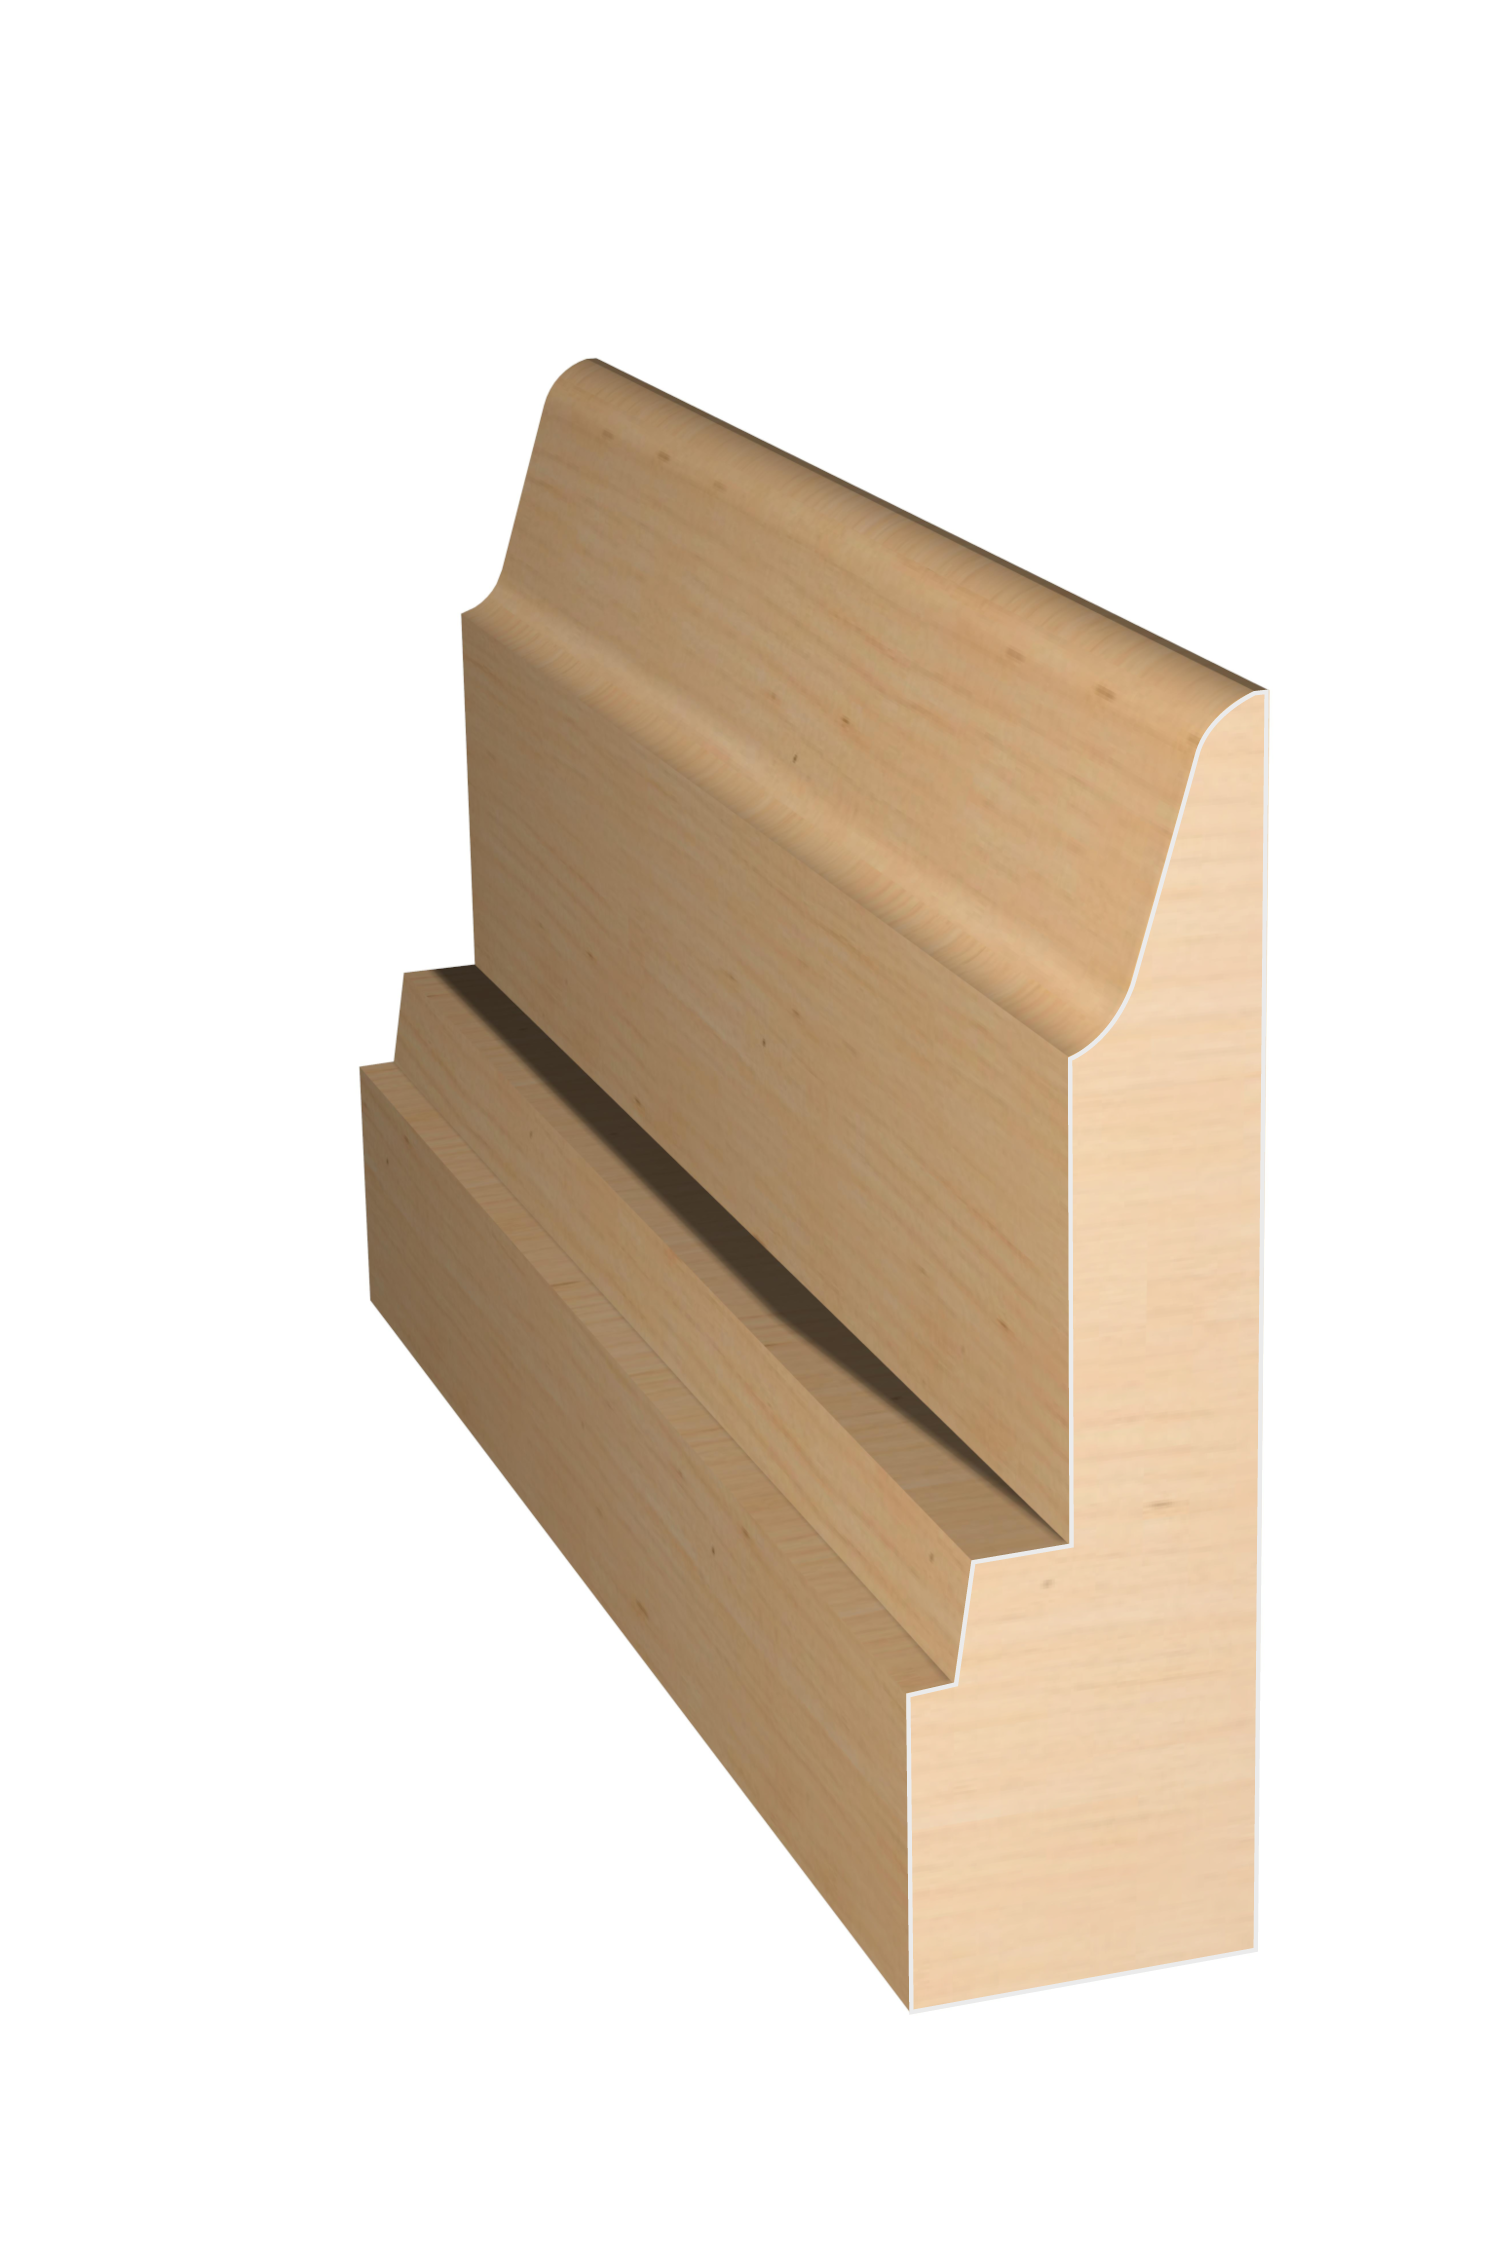 Three dimensional rendering of custom casing wood molding CAPL31241 made by Public Lumber Company in Detroit.